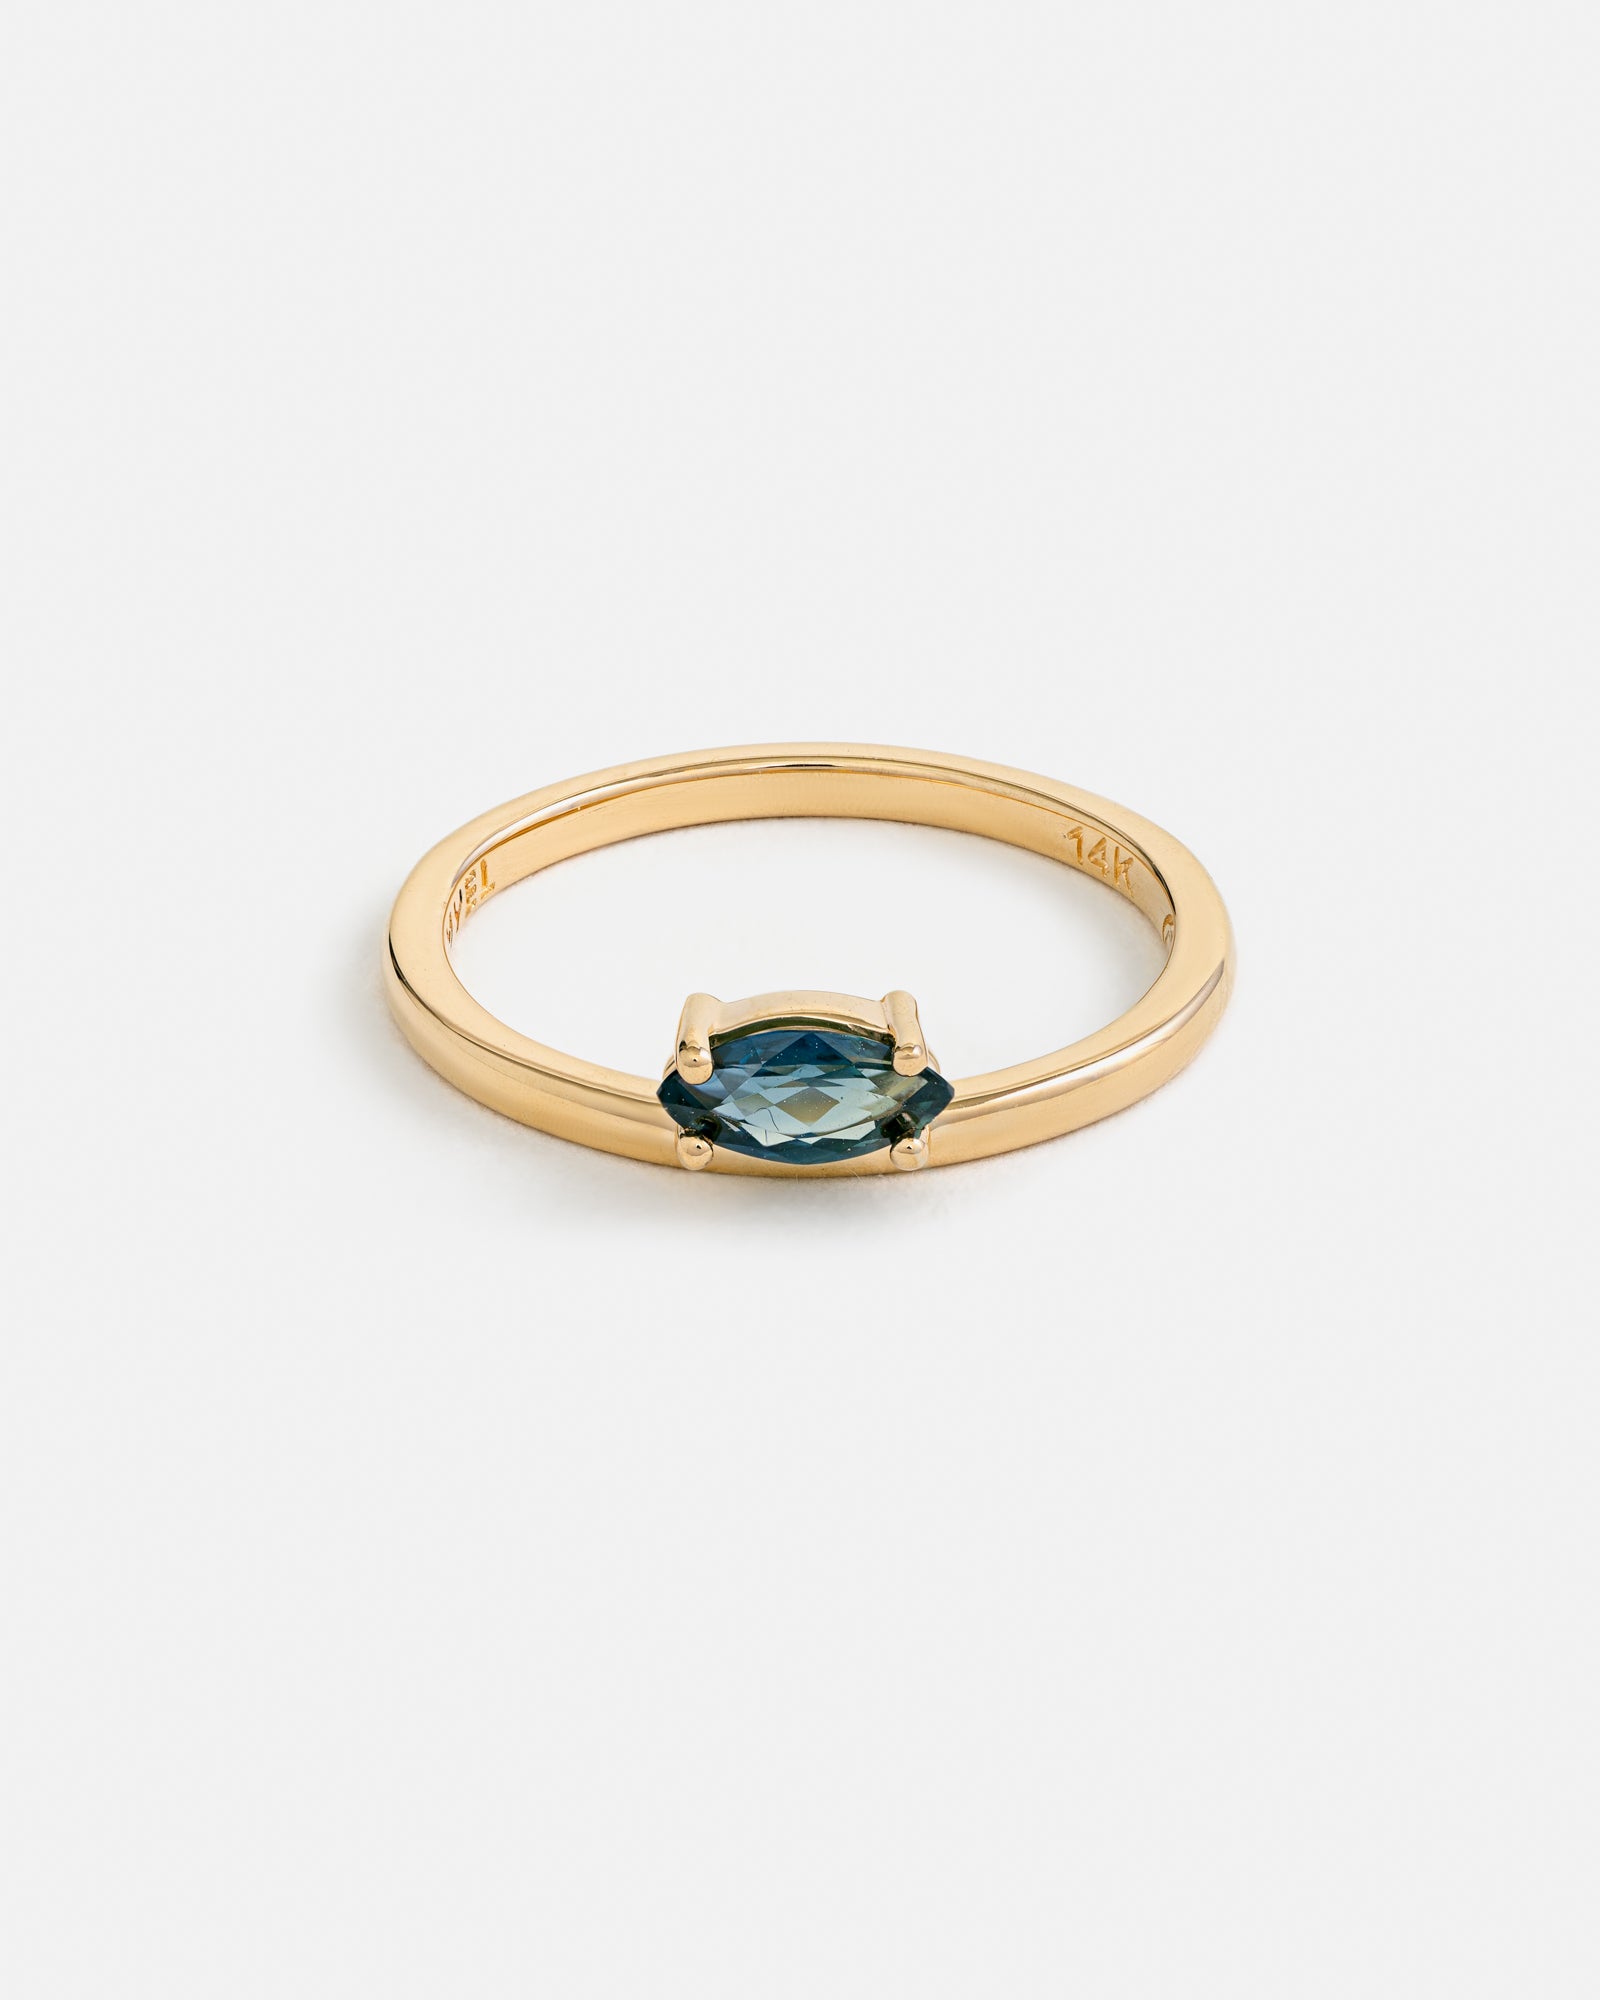 Off-set Marquise ring in 14k Fairmined Gold with Green Australian Sapphire